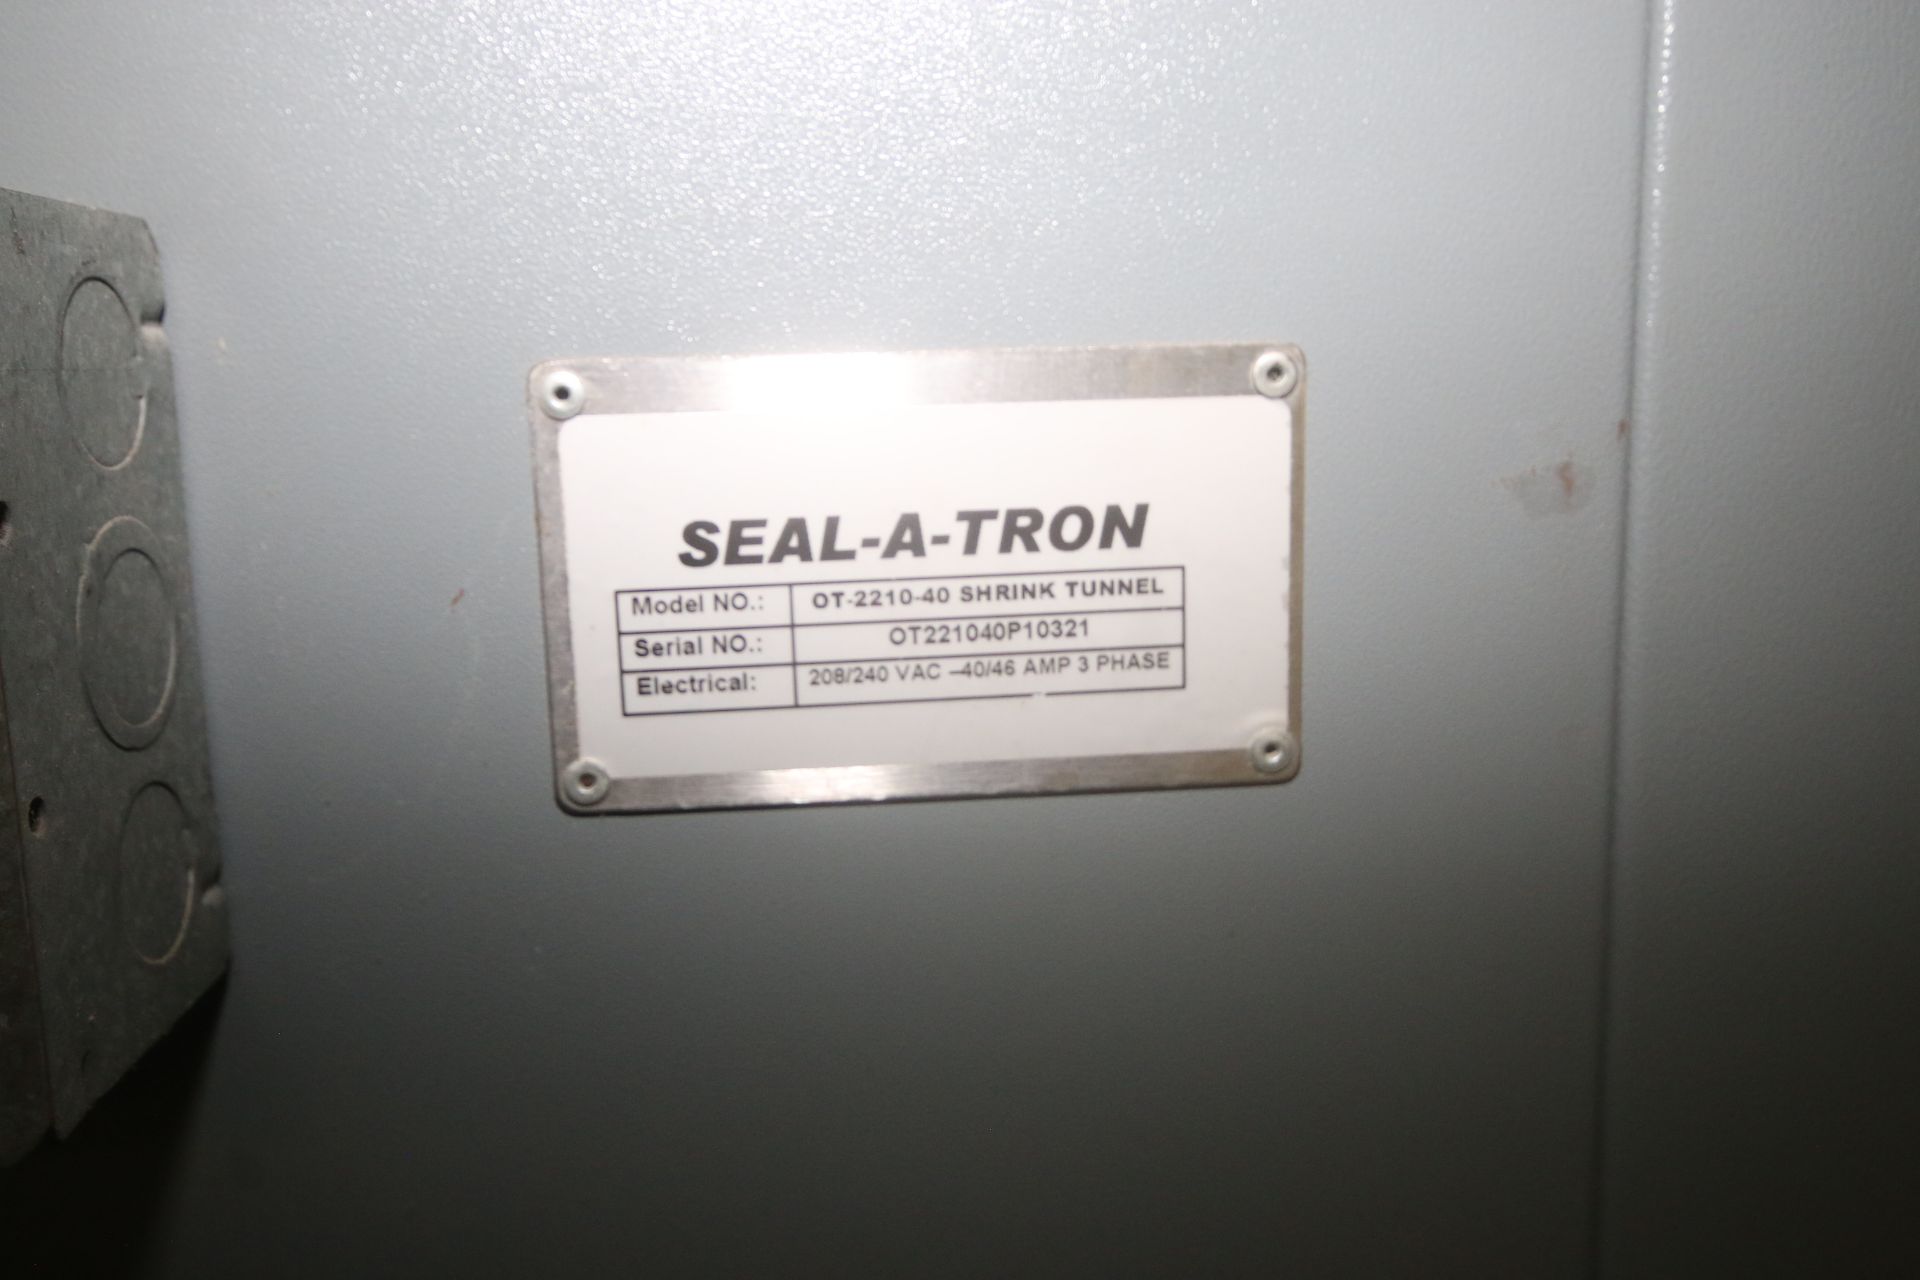 Seal-A-Tron Shrink Tunnel, M/N OT-2210-40, S/N OT22140P10321, with Aprox. 21" W x 7" H, with - Image 3 of 5